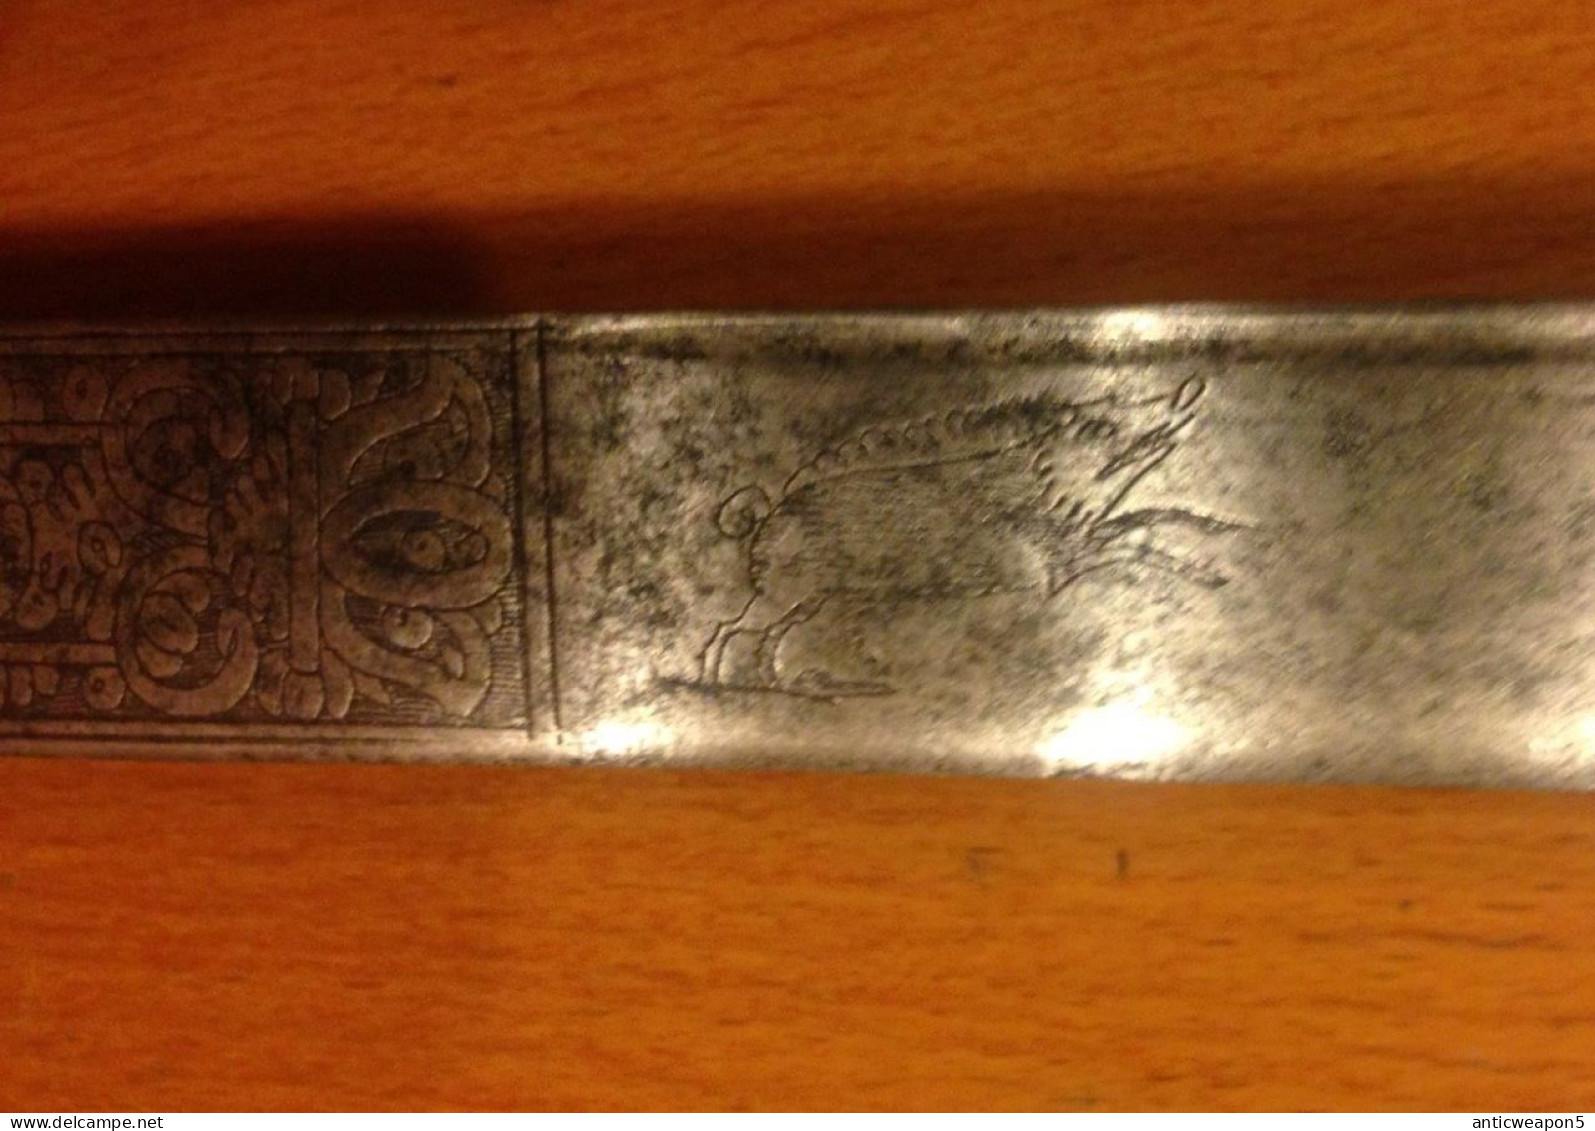 Tesak hunting with ox motifs on the blade Italy M1780 (T313)